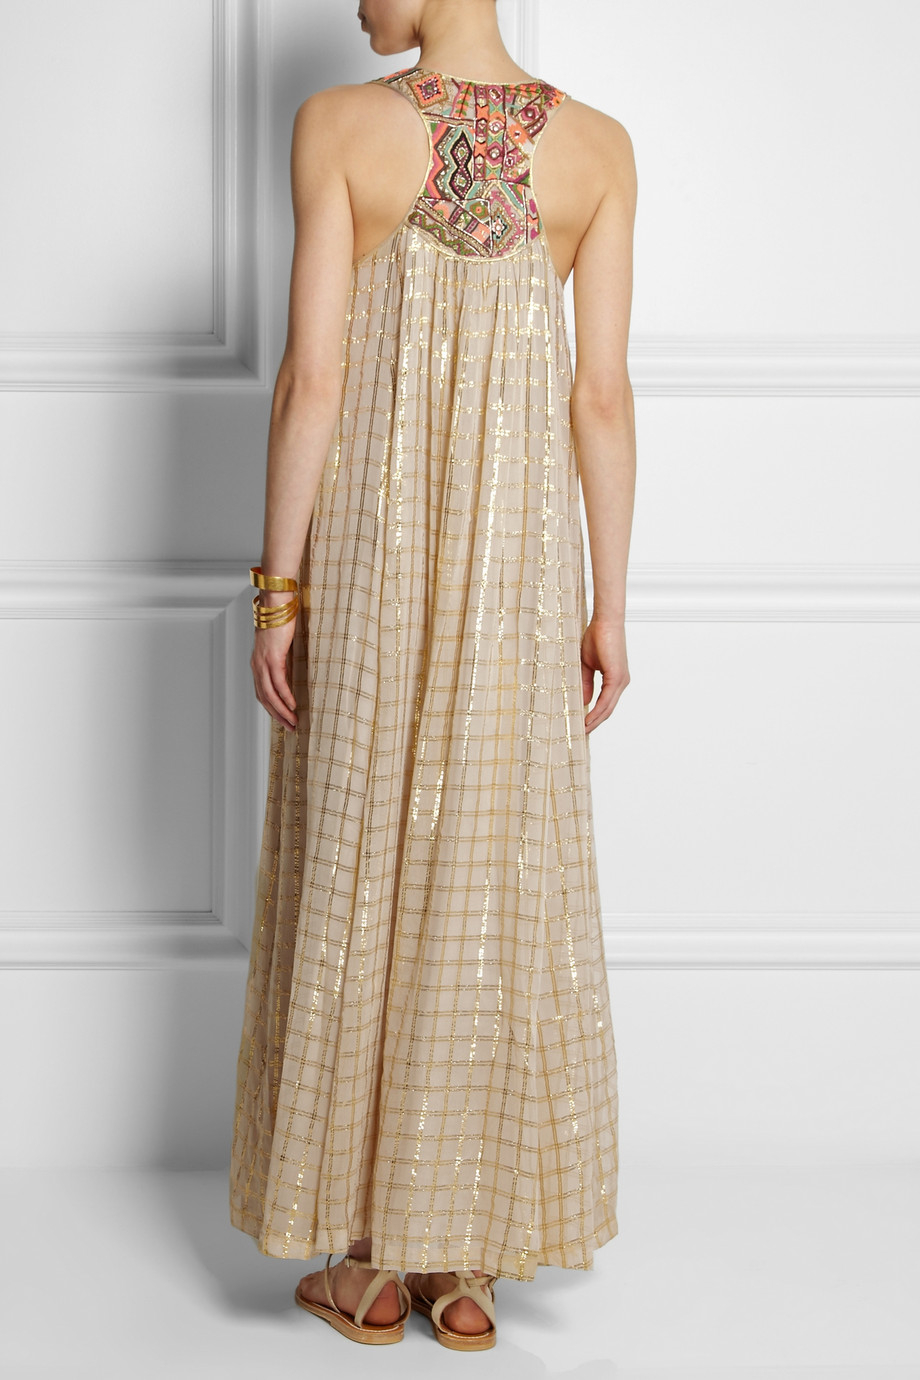 Lyst - Vineet Bahl Embroidered Voile Maxi Dress in Metallic